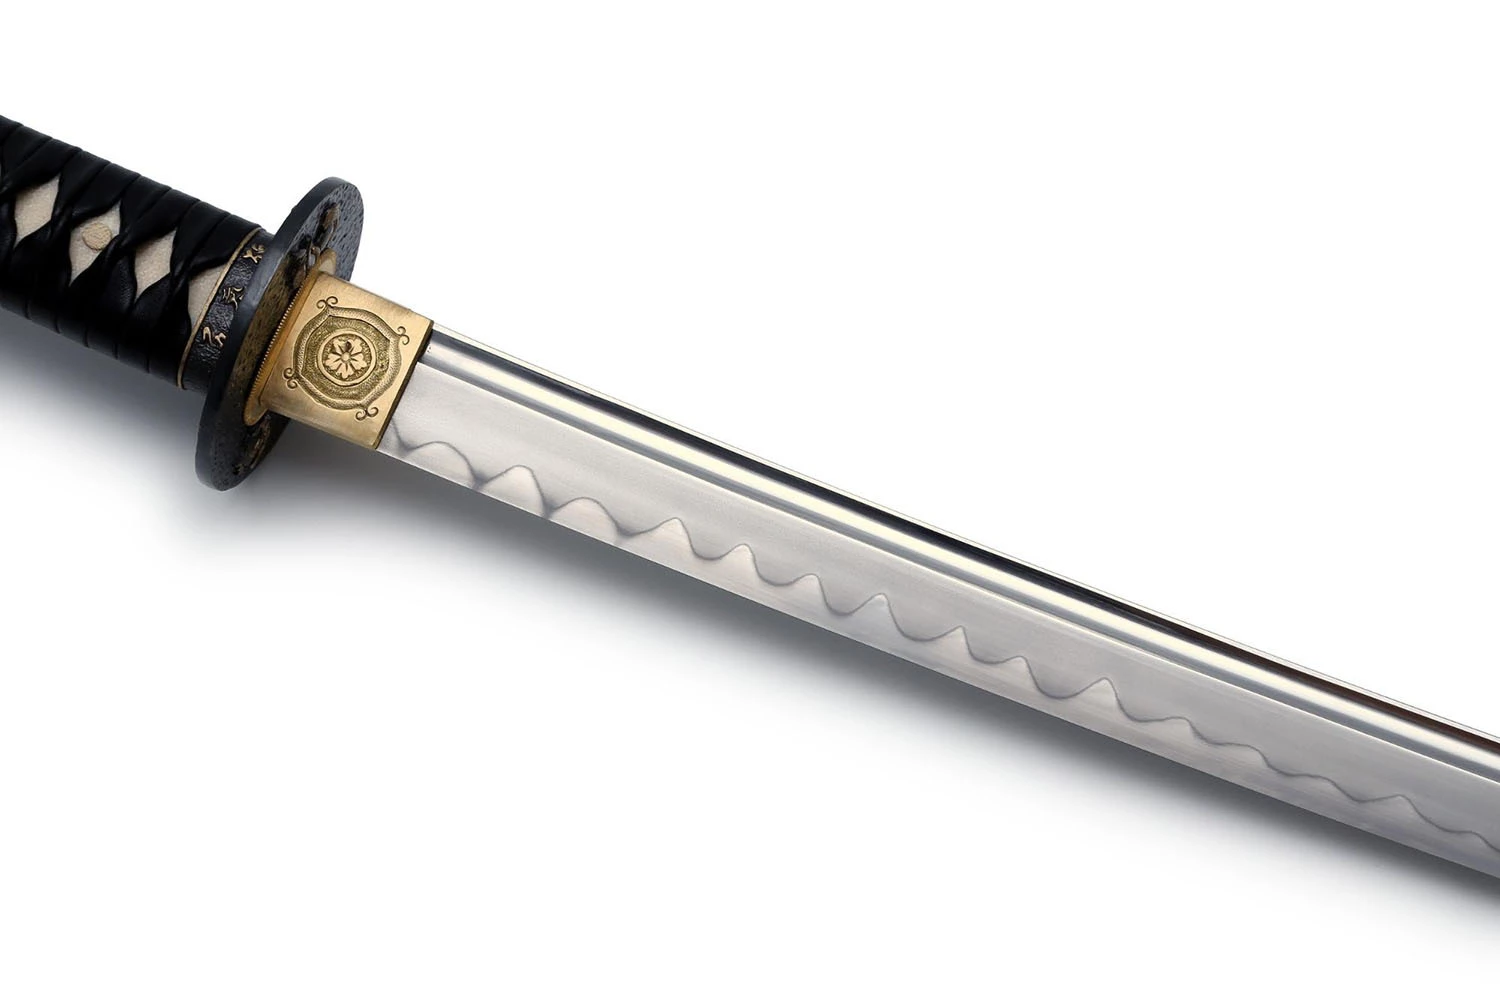 The best criterion when selecting a decorative katana